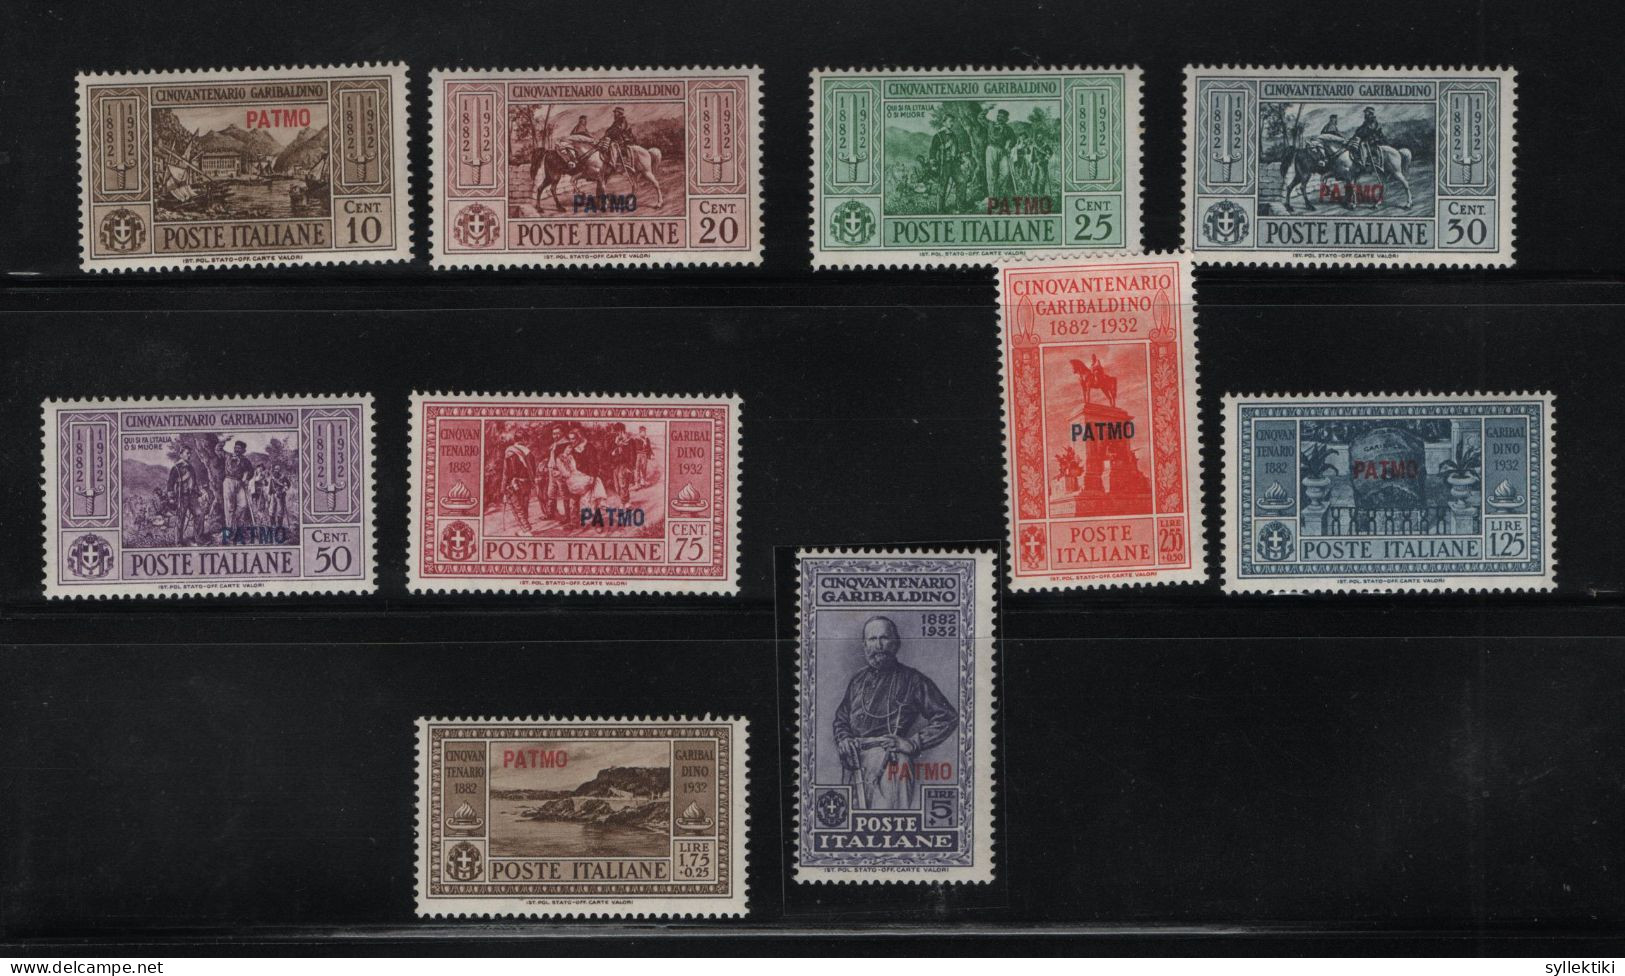 GREECE 1932 DODECANESE GARIBALDI ISSUE PATMO OVERPRINT COMPLETE SET MNH STAMPS   HELLAS No 108XI - 117XI AND VALUE EURO - Dodekanisos